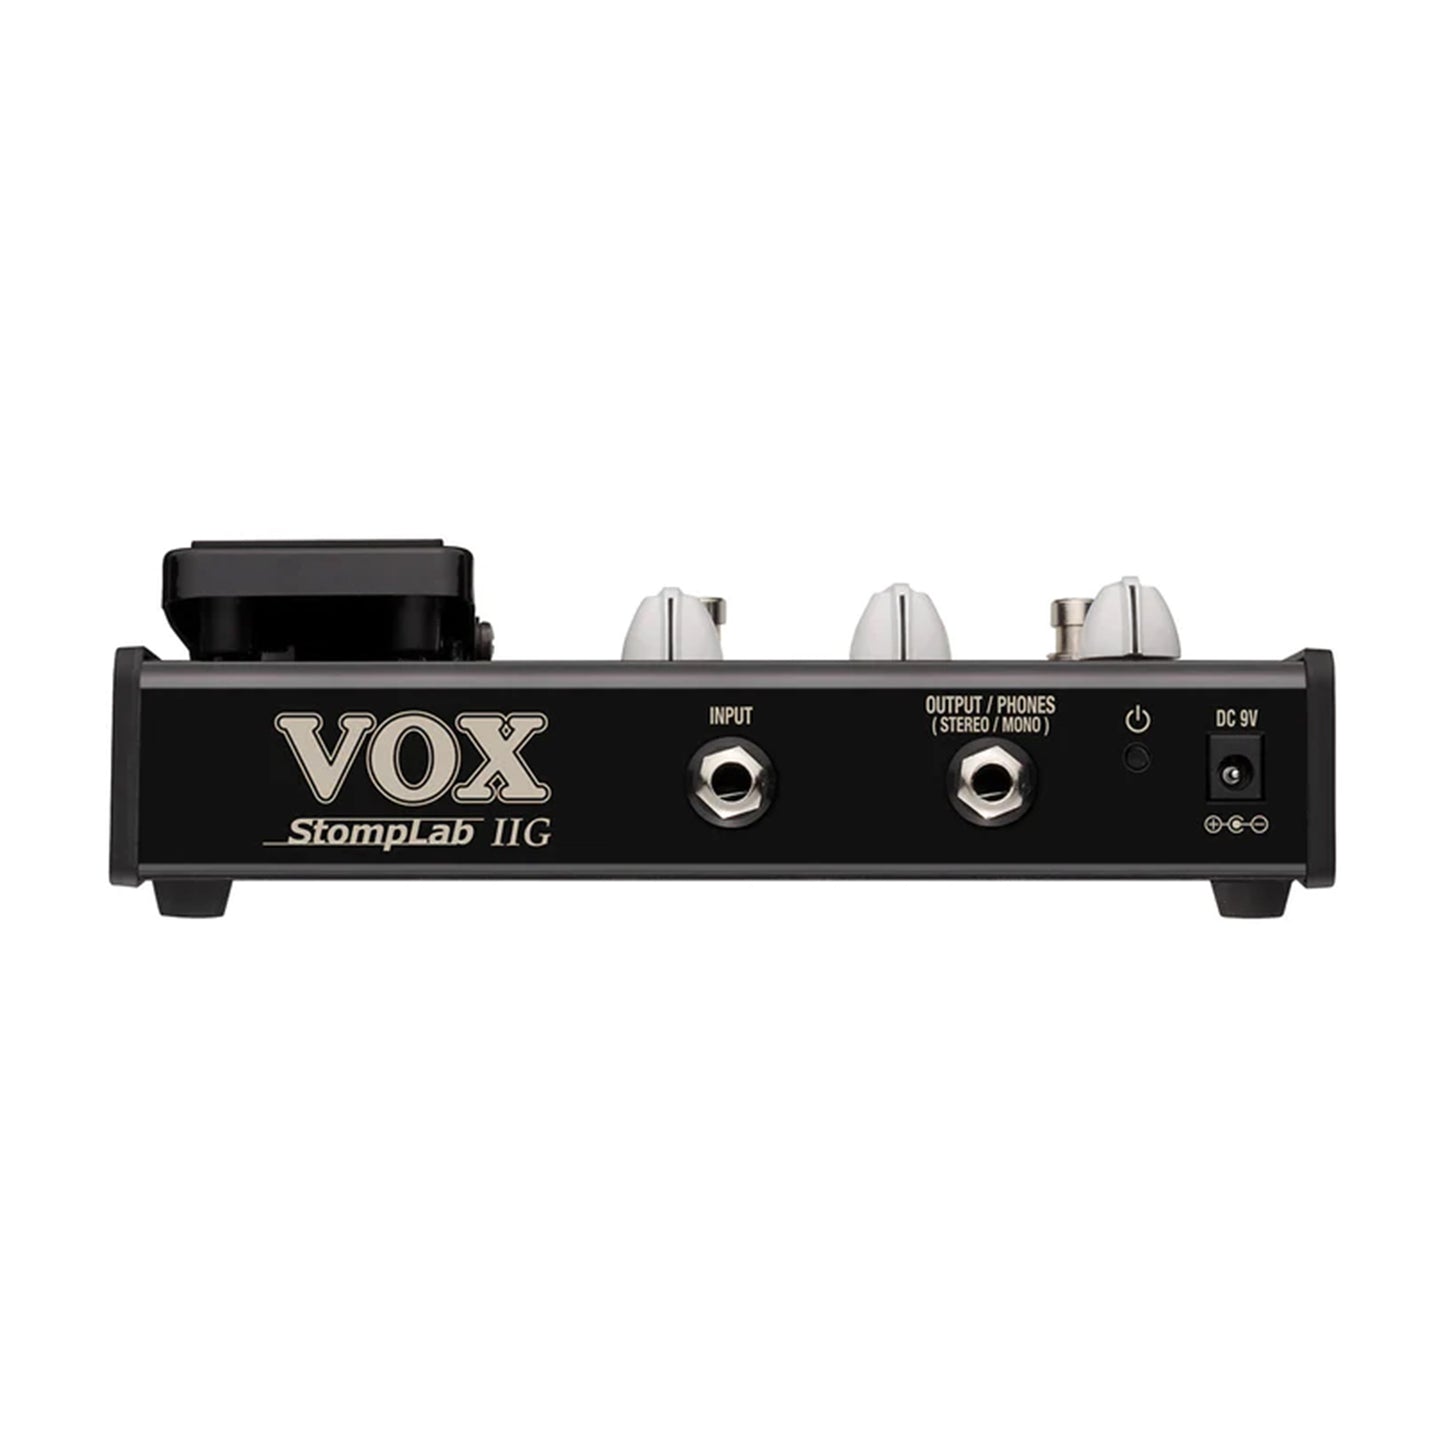 Vox SL2G Stomplab 2G Multi Effects Guitar Pedal